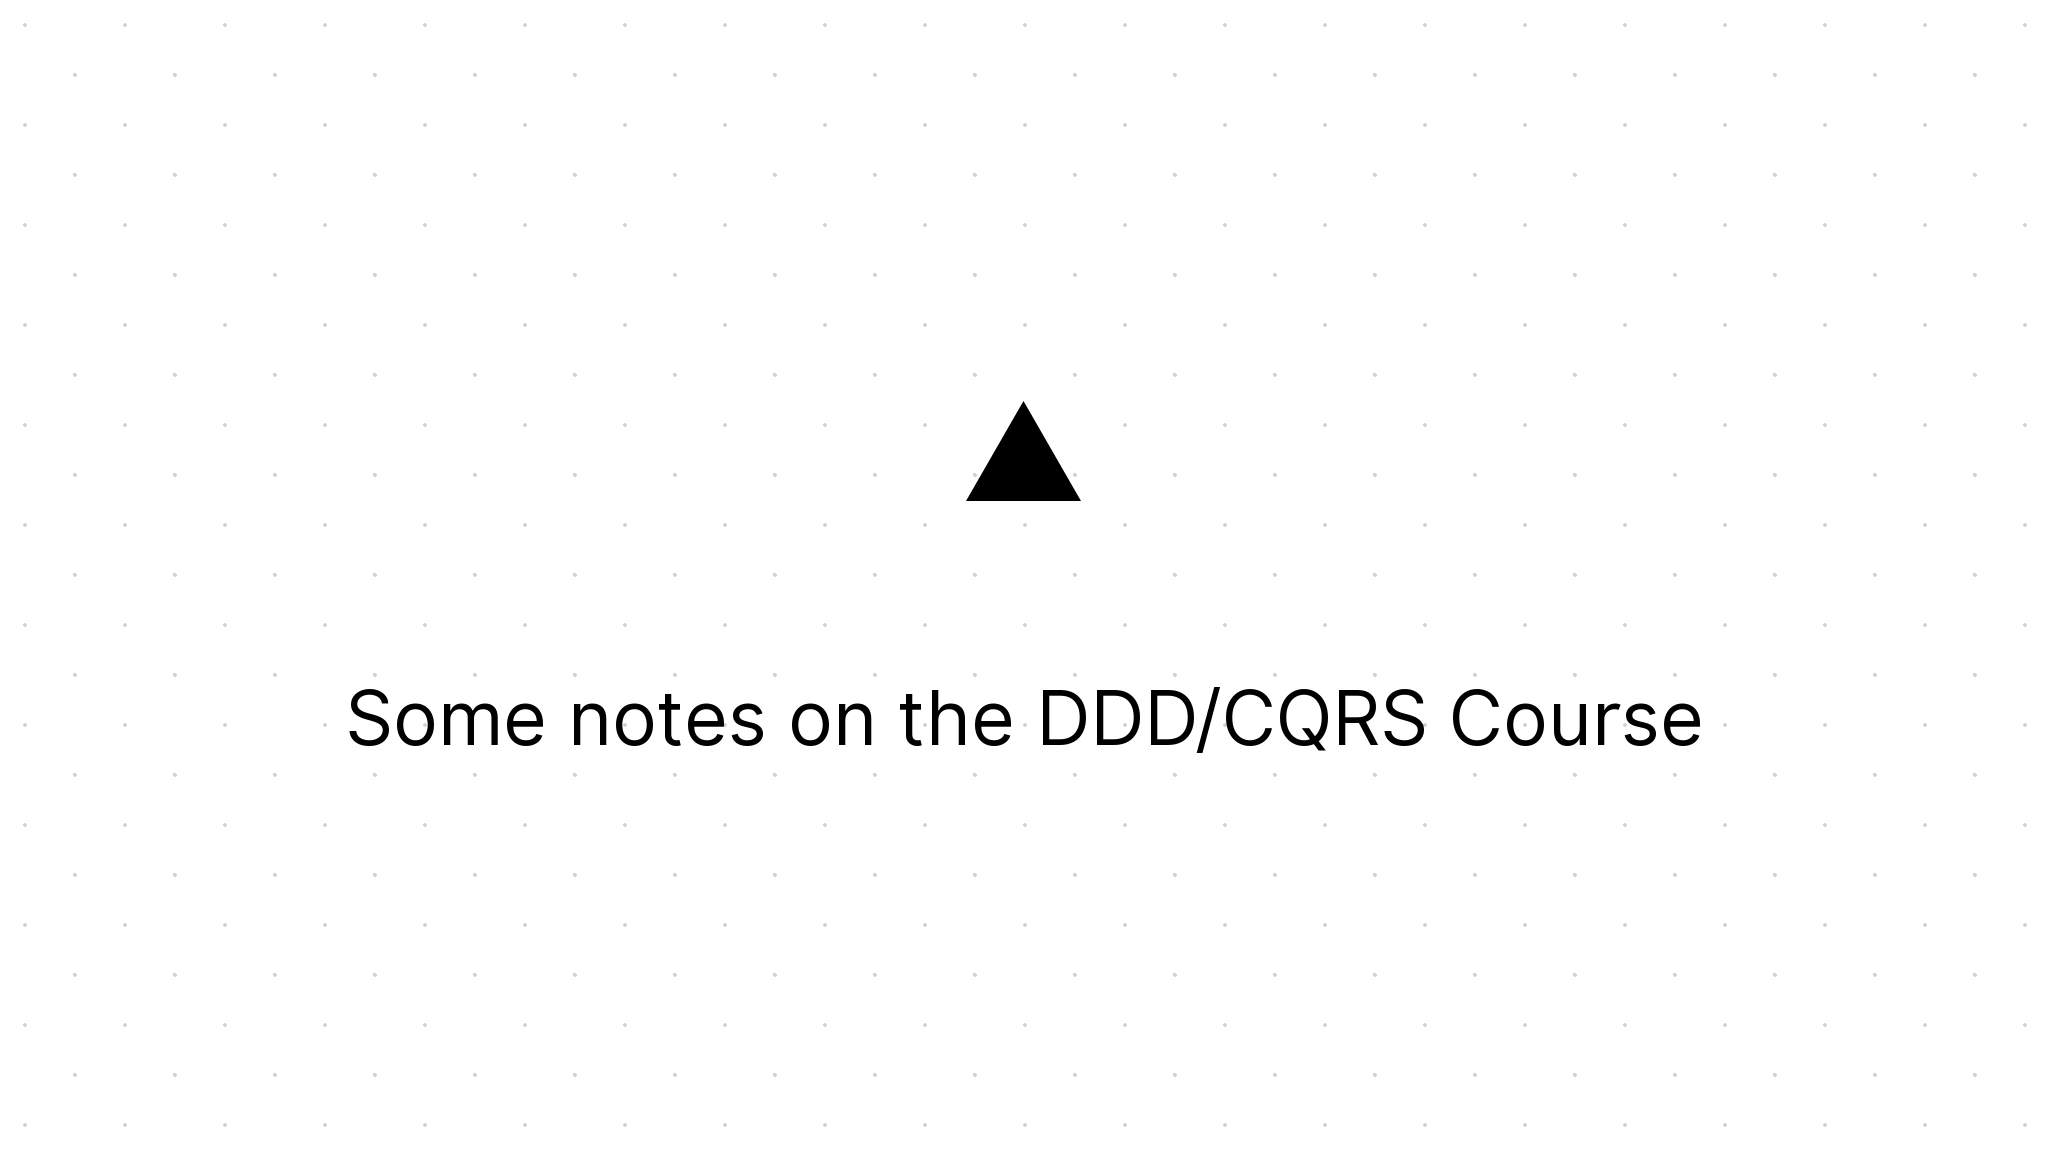 Cover Image for Some notes on the DDD/CQRS Course